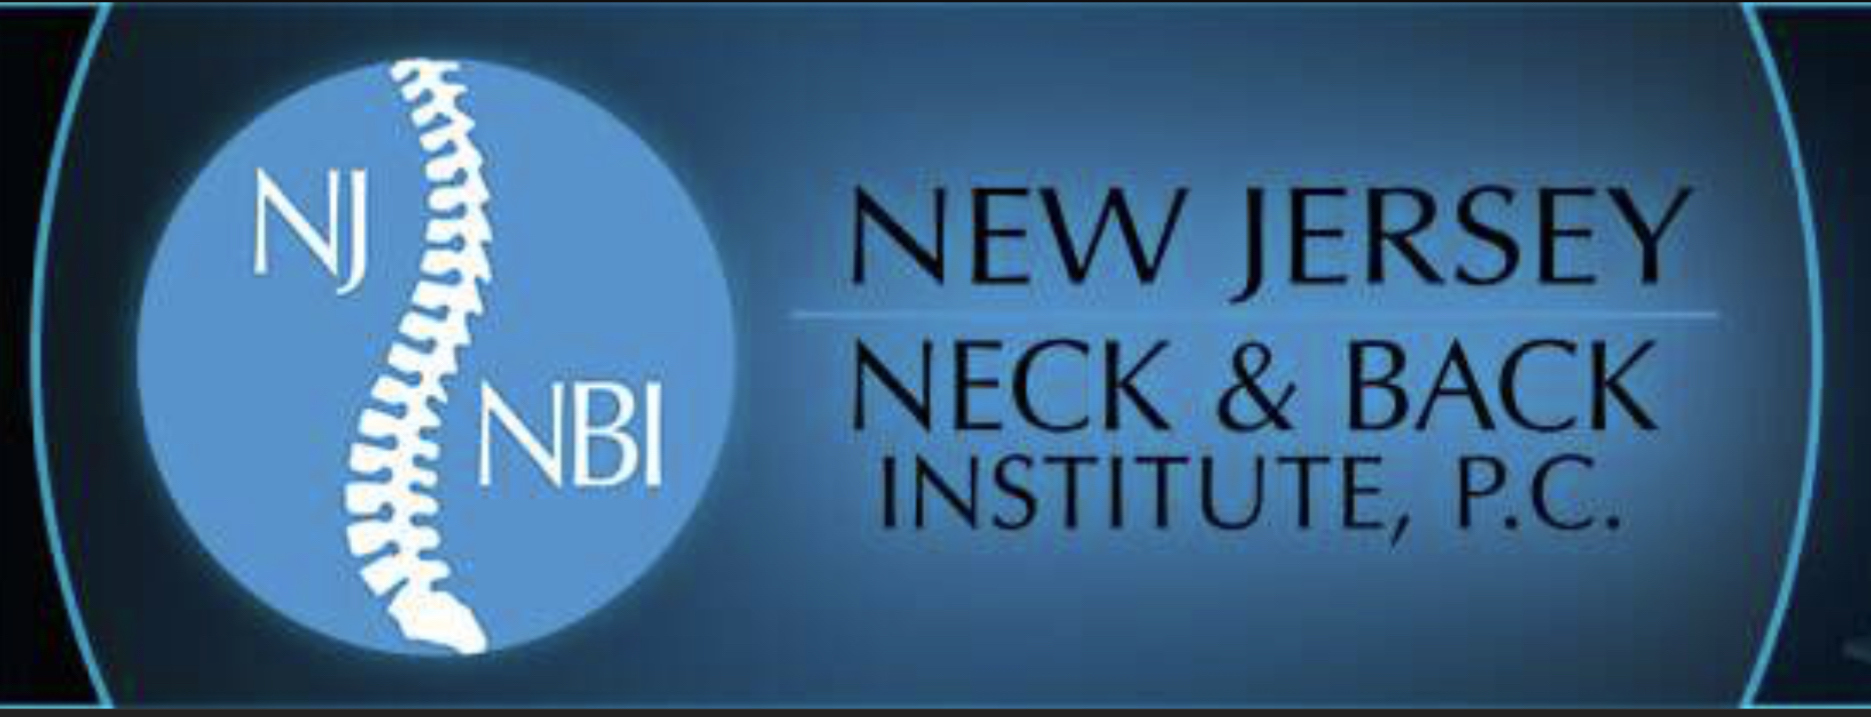 New Jersey Neck and Back Institute, P.C.